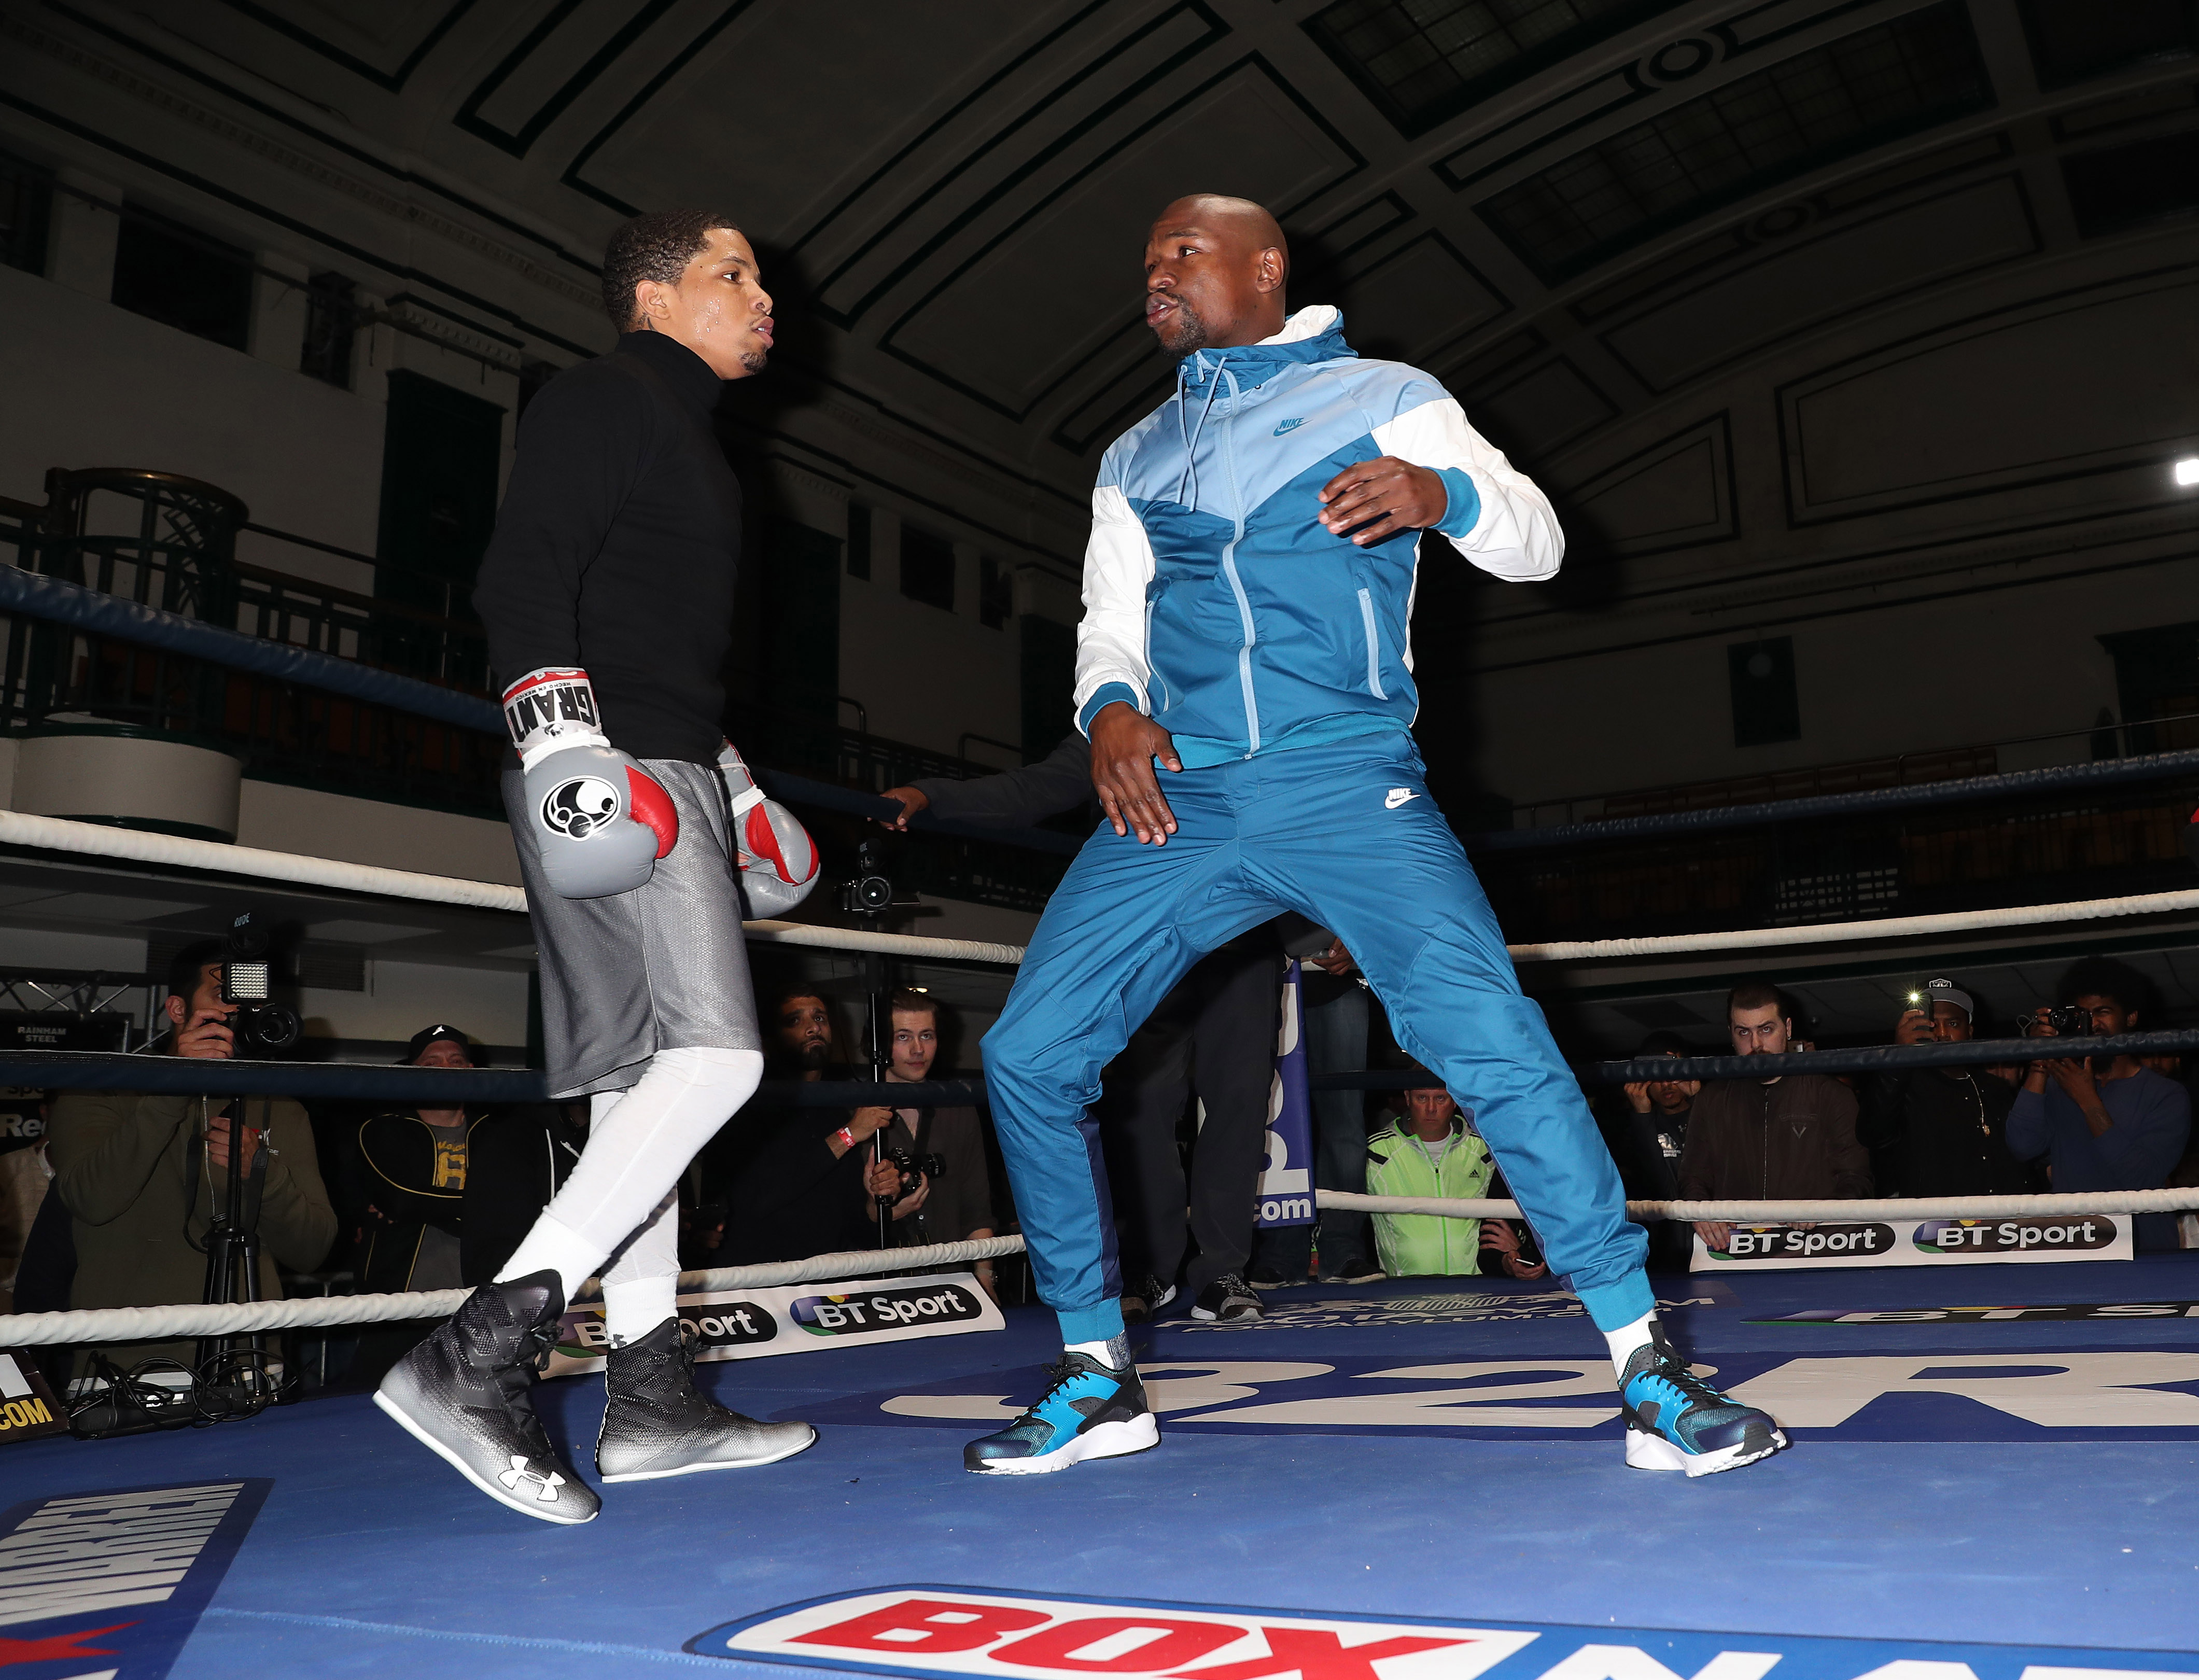 Eric Armit's weekly boxing results - - Boxing News - Ring News24